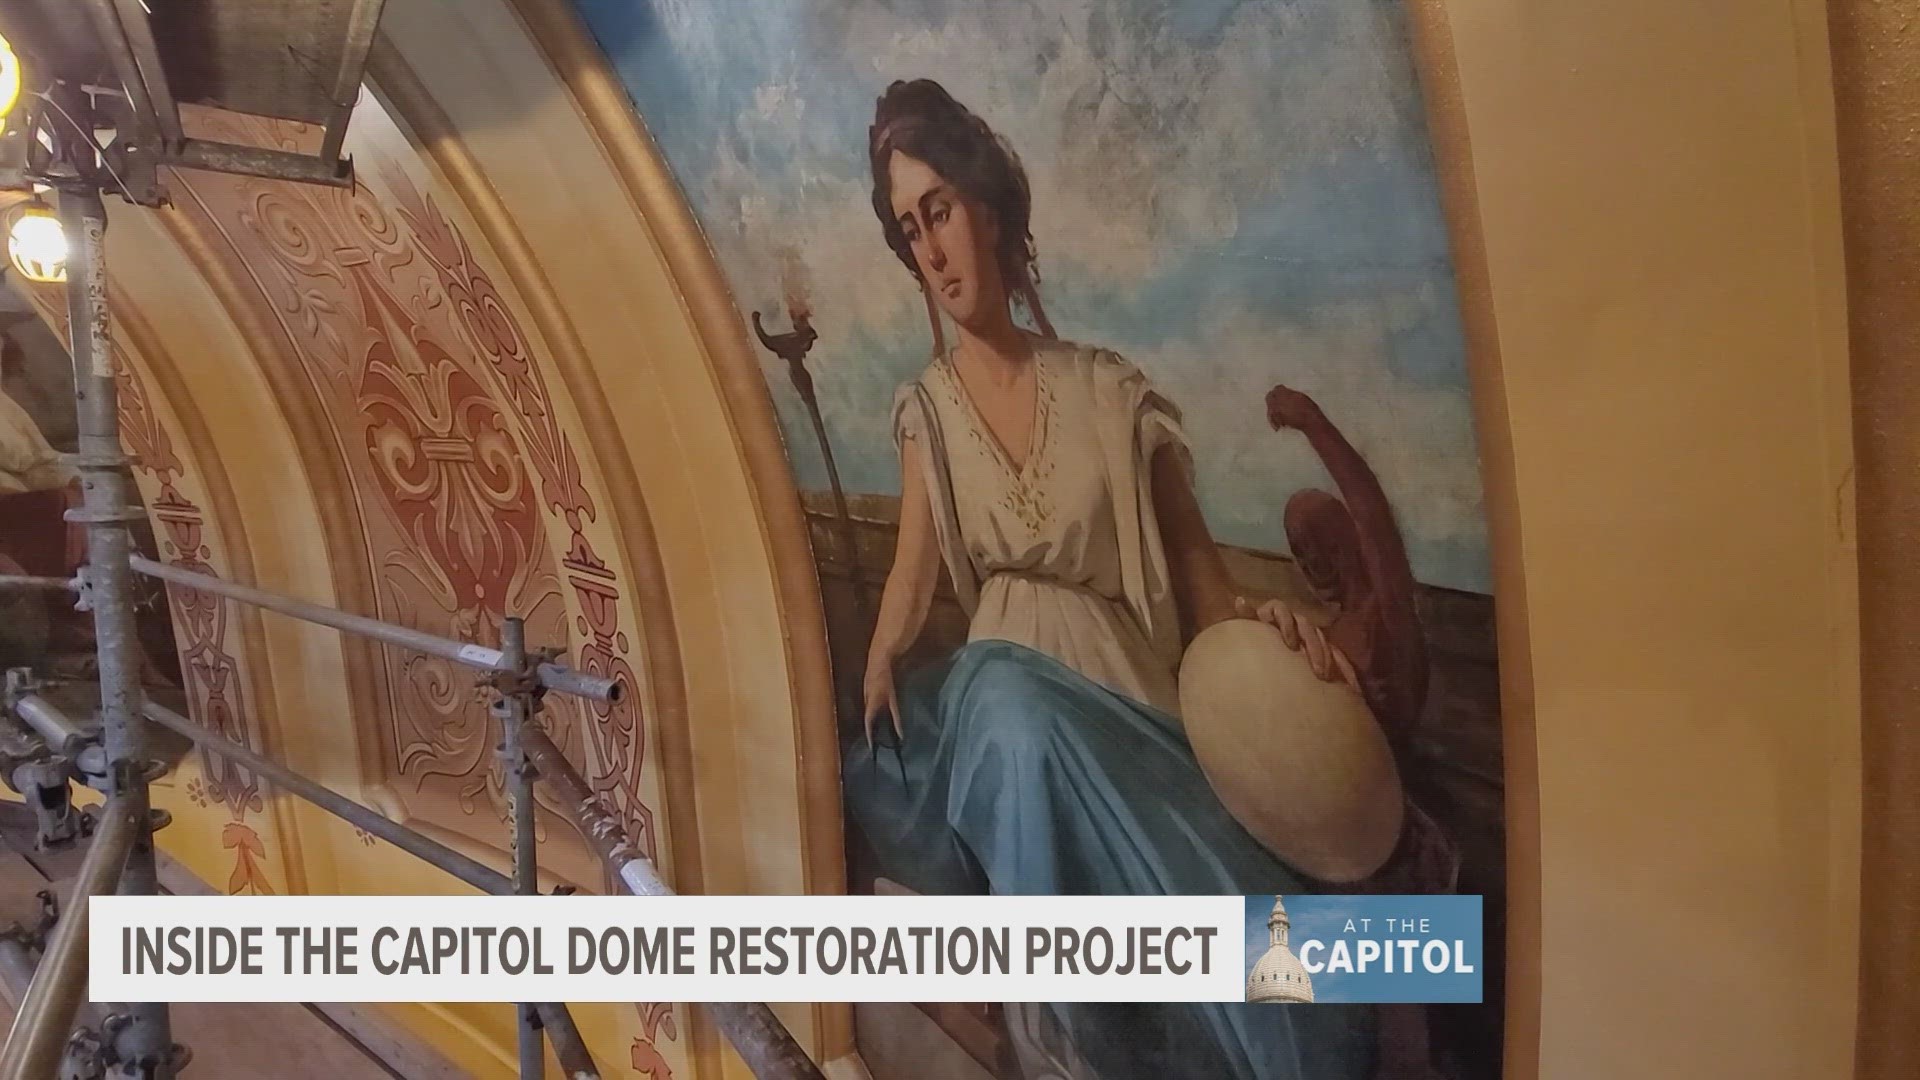 There are 9 acres of hand-painted surfaces in the Michigan capitol building. That beauty means constant maintenance.